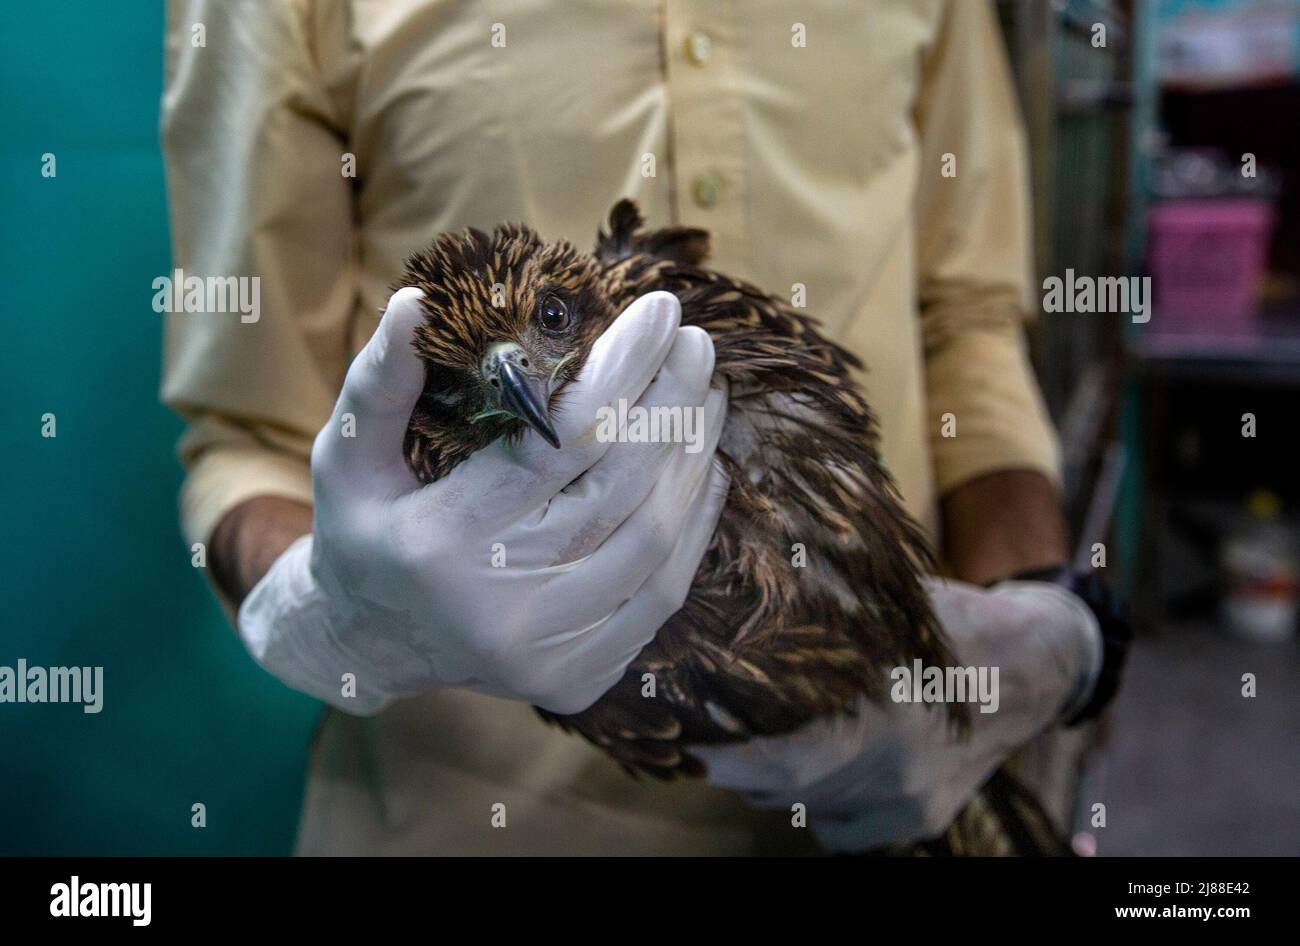 New Delhi, India. 13th May, 2022. A raptor rescuer holds an injured black kite at his clinic in New Delhi, India, May 13, 2022. Two brothers -Saud and Shehzad -in New Delhi have embarked on the mission to save injured raptors. They have been treating the injured birds at their clinic in Wazirabad, New Delhi. Last year they say they saved 2500 birds and since the beginning of this year over 1300 birds have been treated at their clinic. Credit: Javed Dar/Xinhua/Alamy Live News Stock Photo